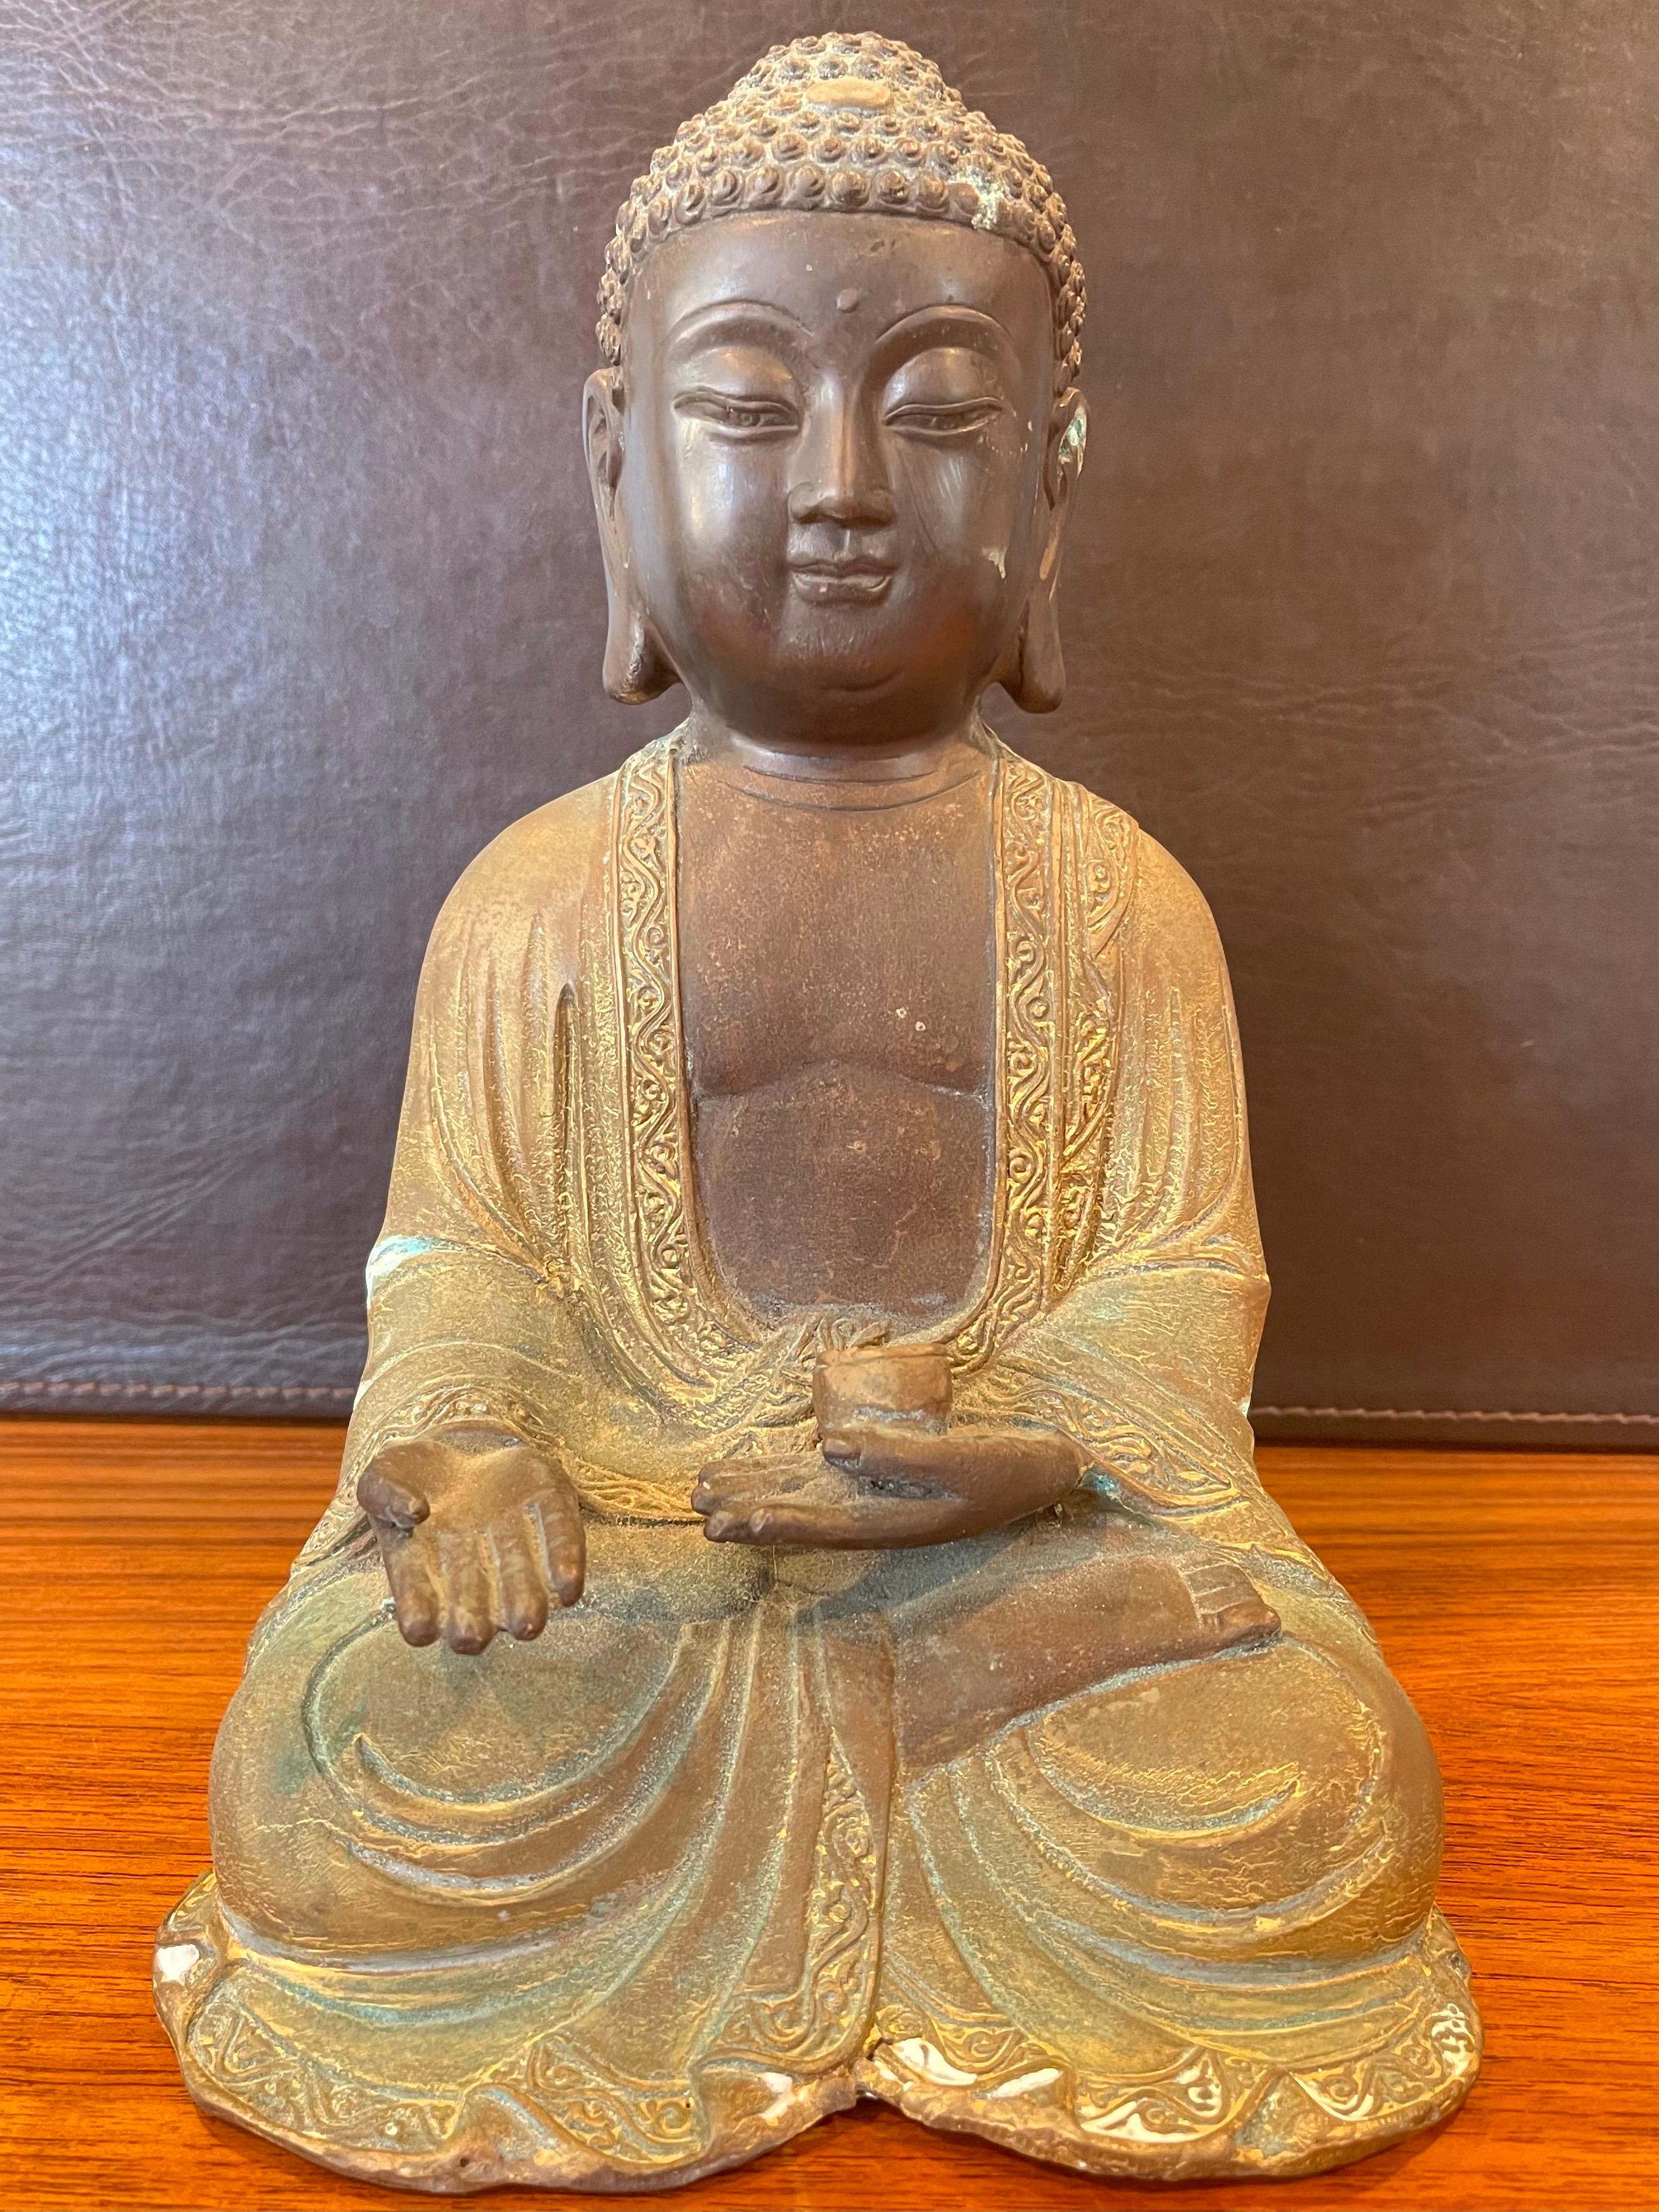 Decorative mid-century bronze sitting buddha, circa 1970s. The piece is in very good vintage condition and measures: 7.5